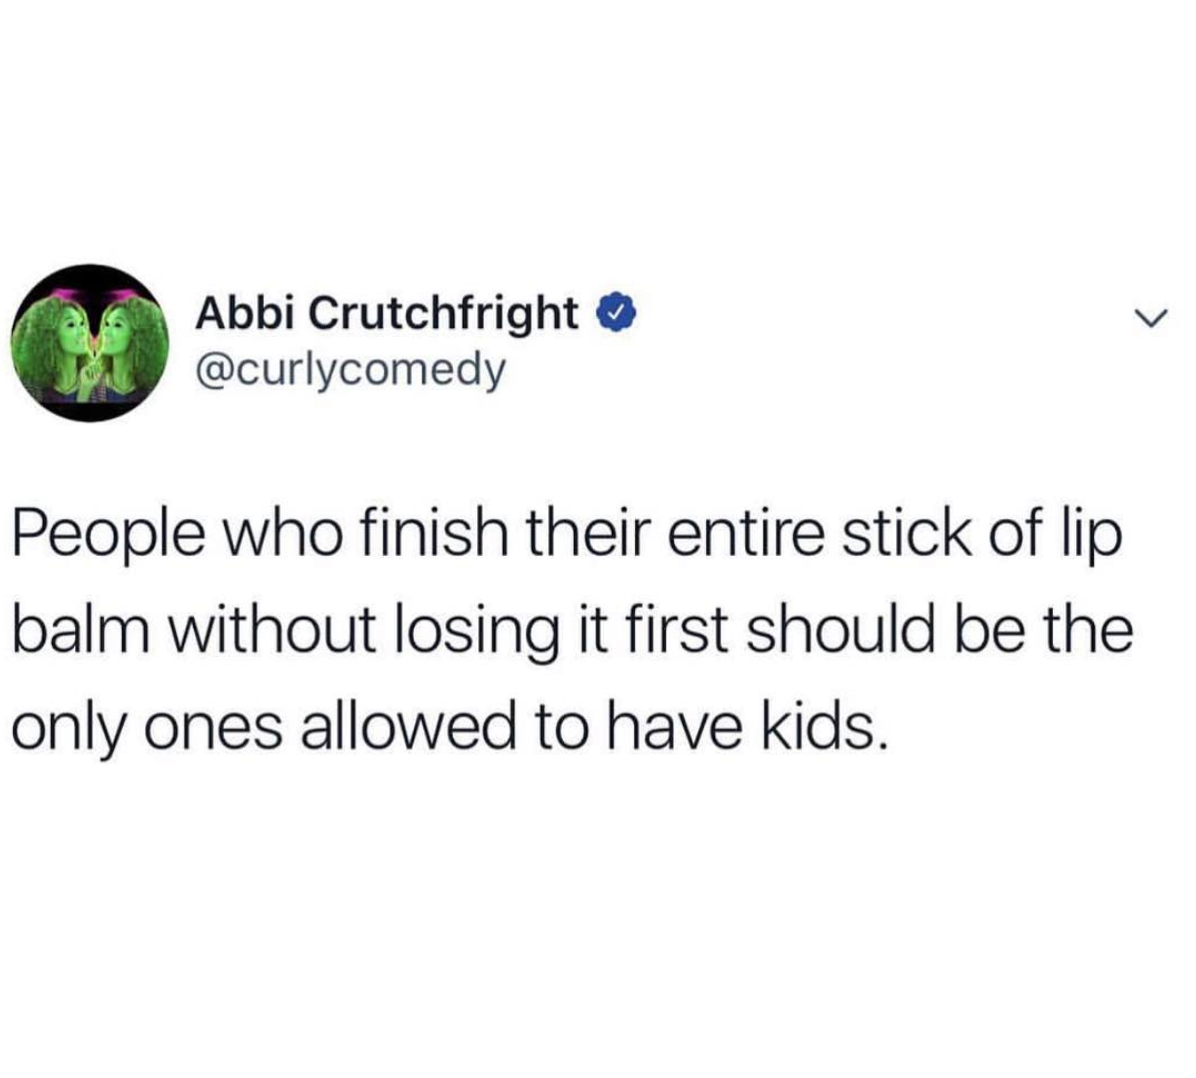 memes - Abbi Crutchfright People who finish their entire stick of lip balm without losing it first should be the only ones allowed to have kids.